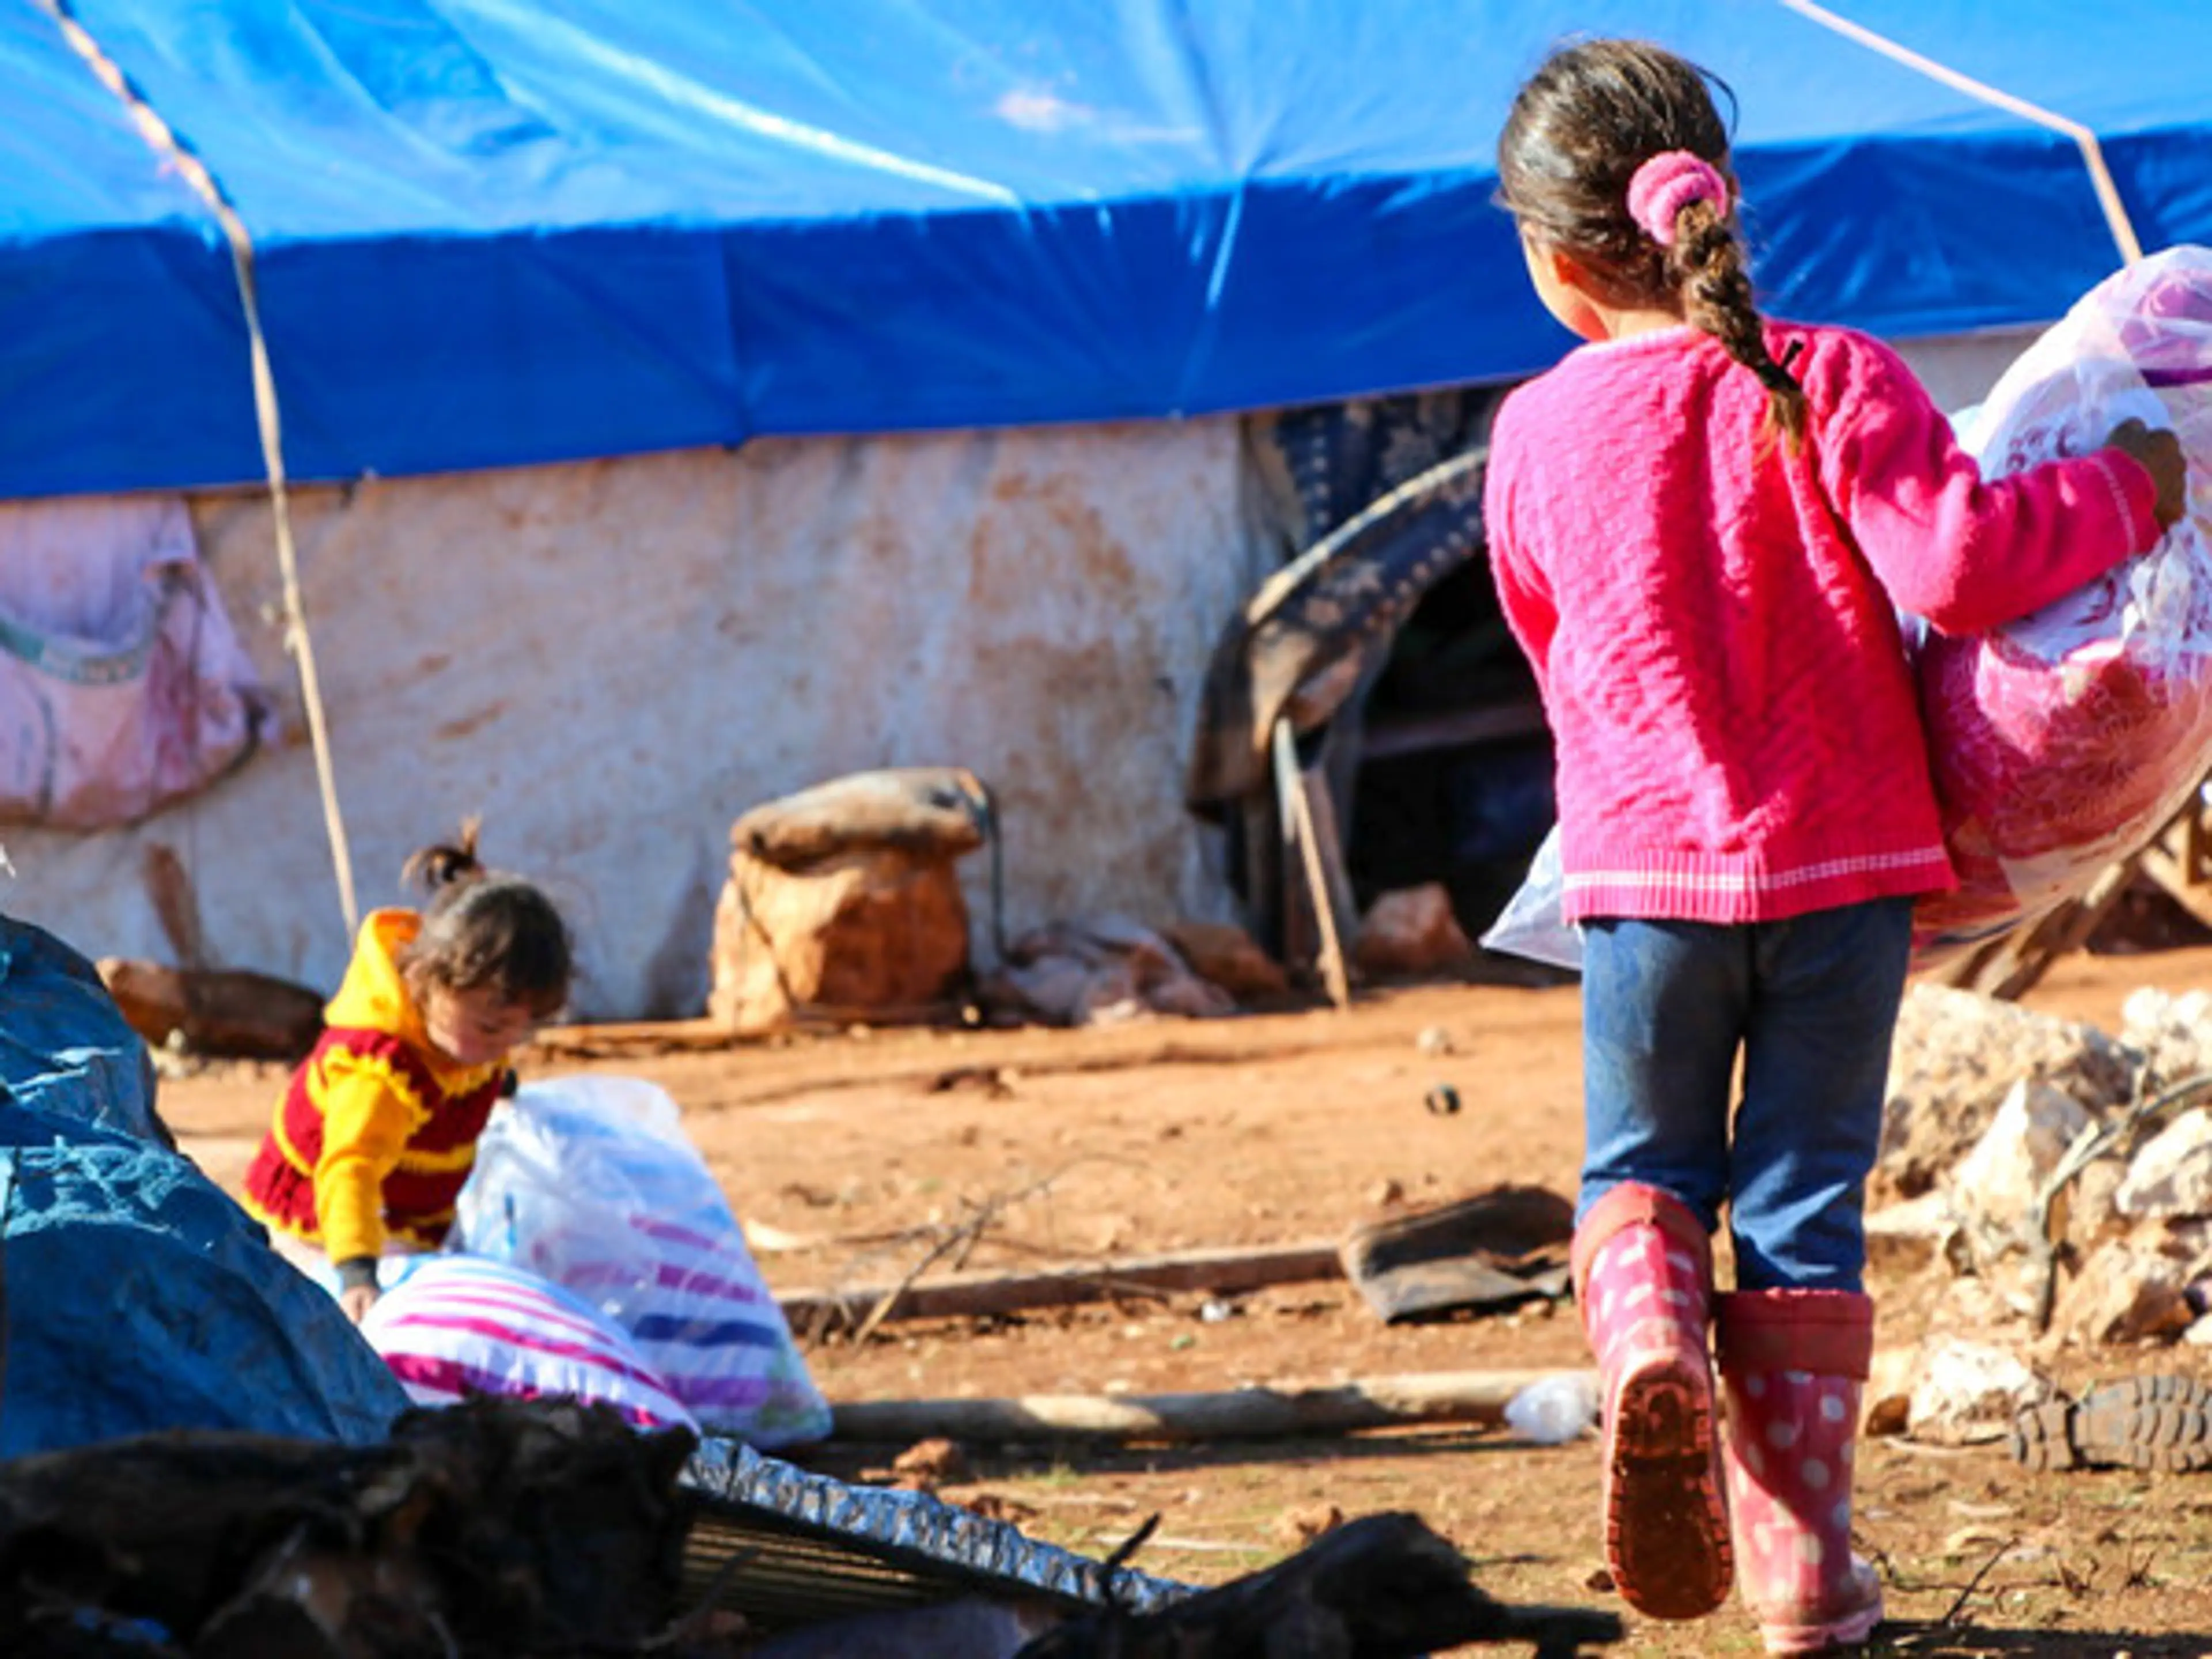 Middle East - Syria - Syrian child in refugee camp